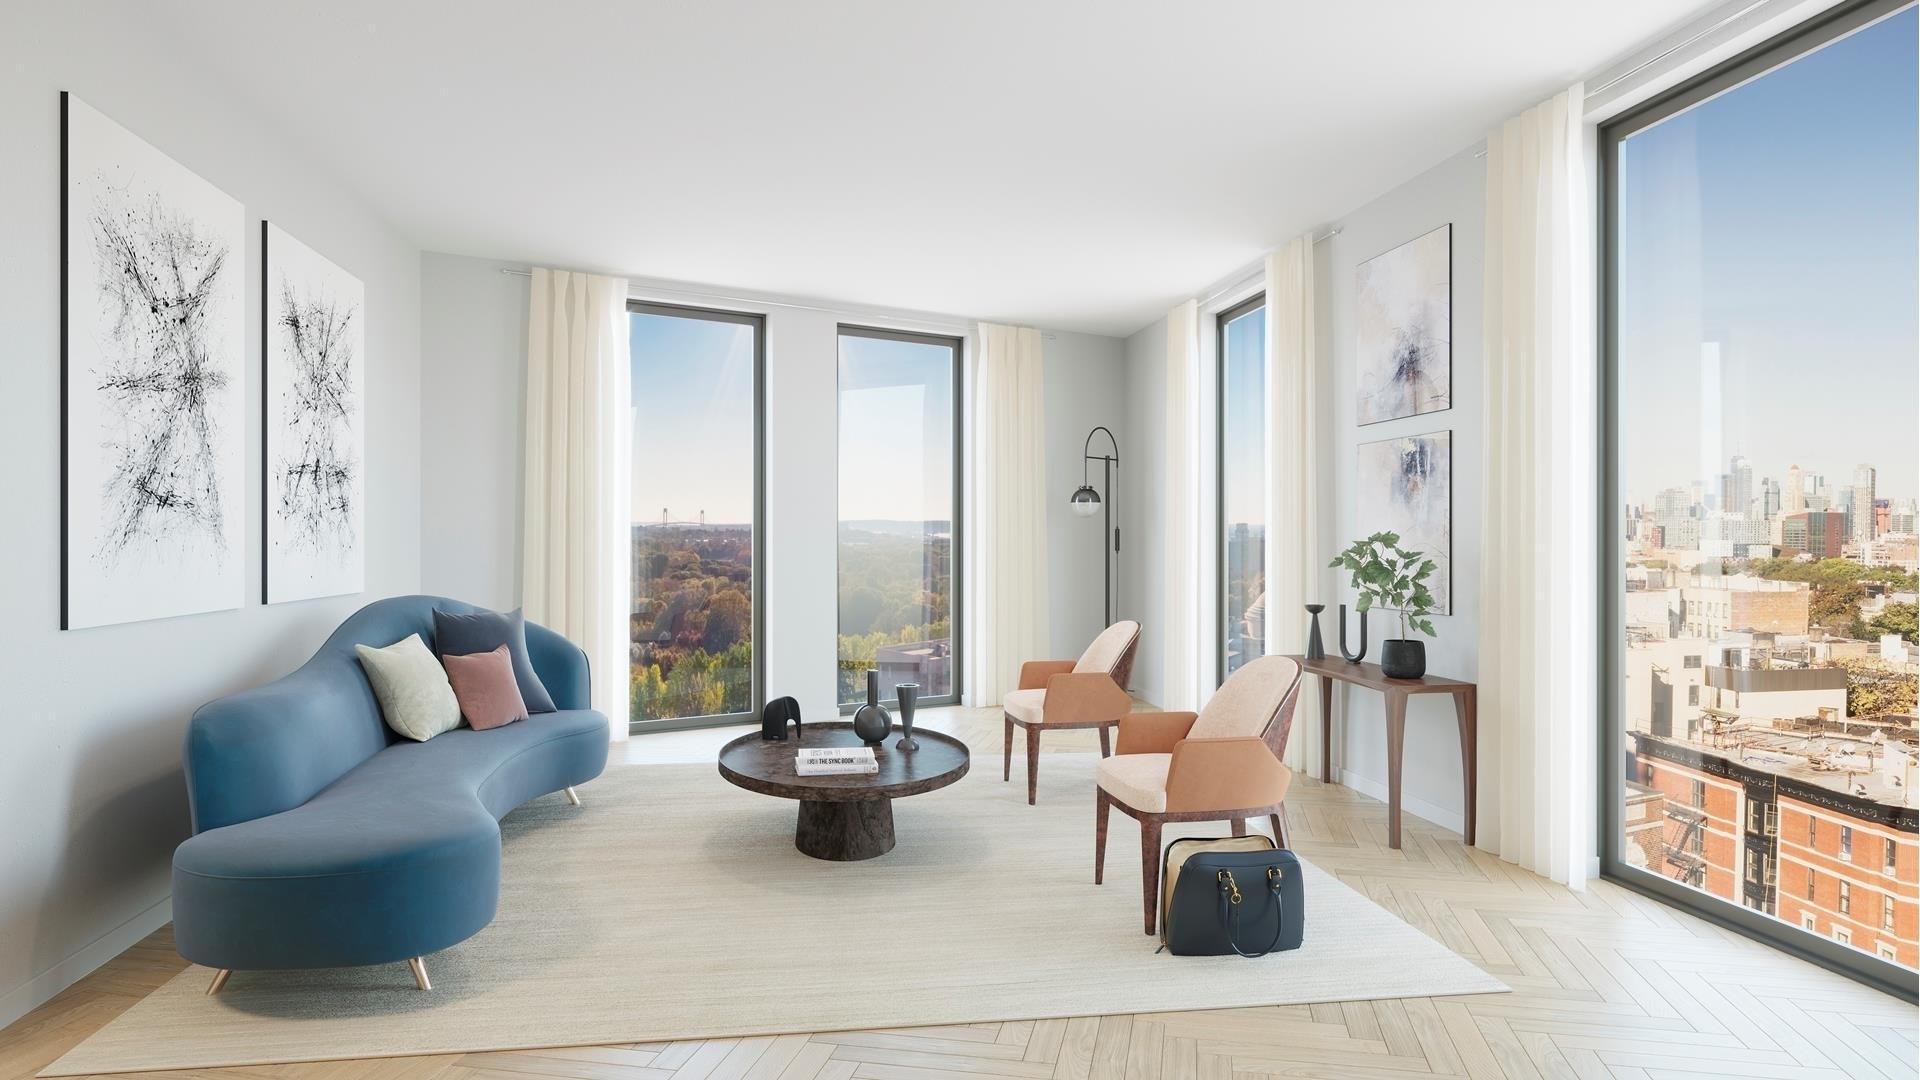 Condominium for Sale at The Museum House, 805 WASHINGTON AVE, 8B Prospect Heights, Brooklyn, NY 11238